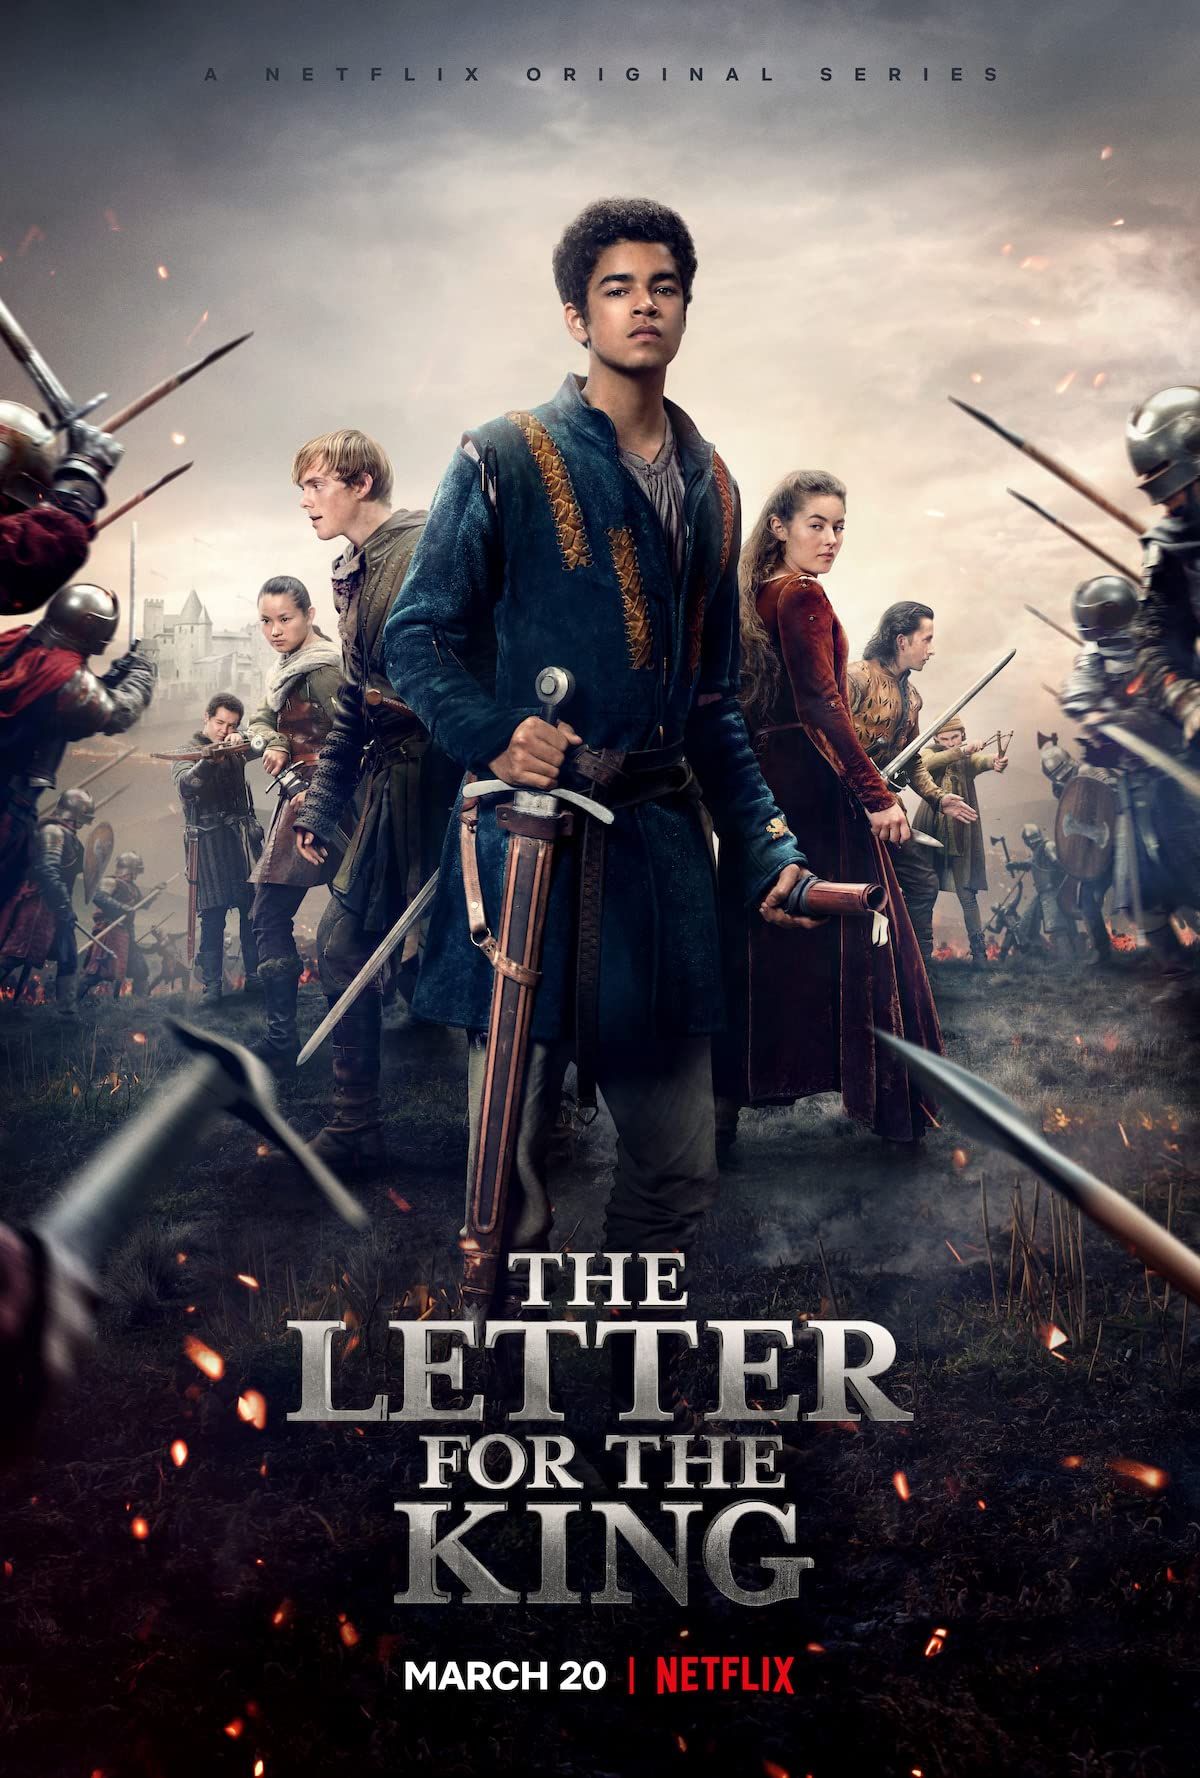 The Letter For The King (2020) Season 1 Hindi Dubbed Complete HDRip download full movie